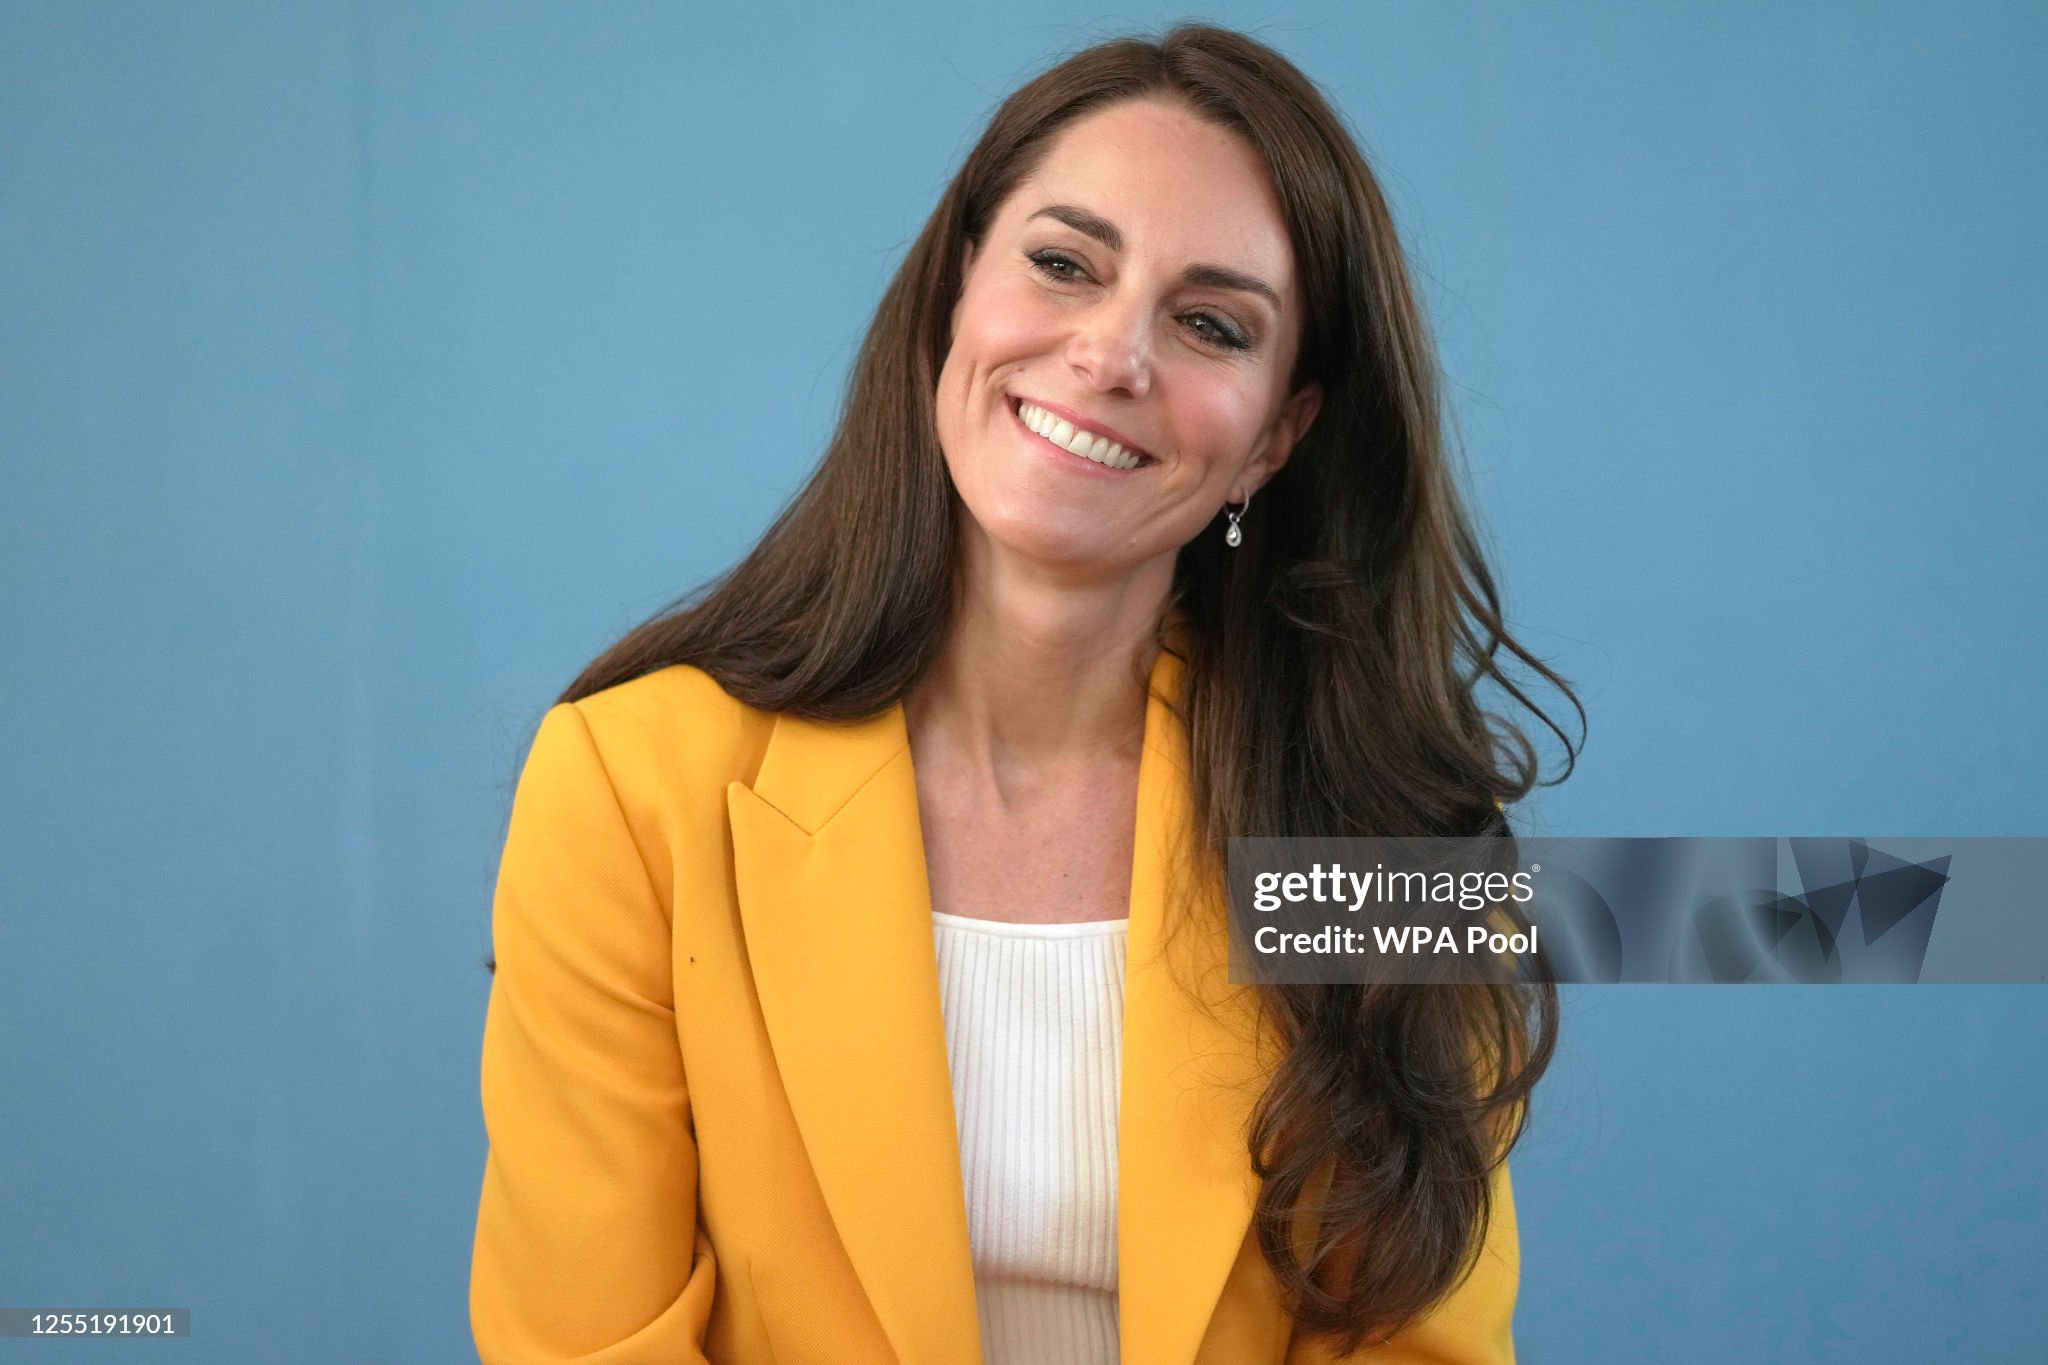 catherine-princess-of-wales-smiles-as-she-visits-the-dame-kelly-holmes-trust-on-may-16-2023-in.jpg